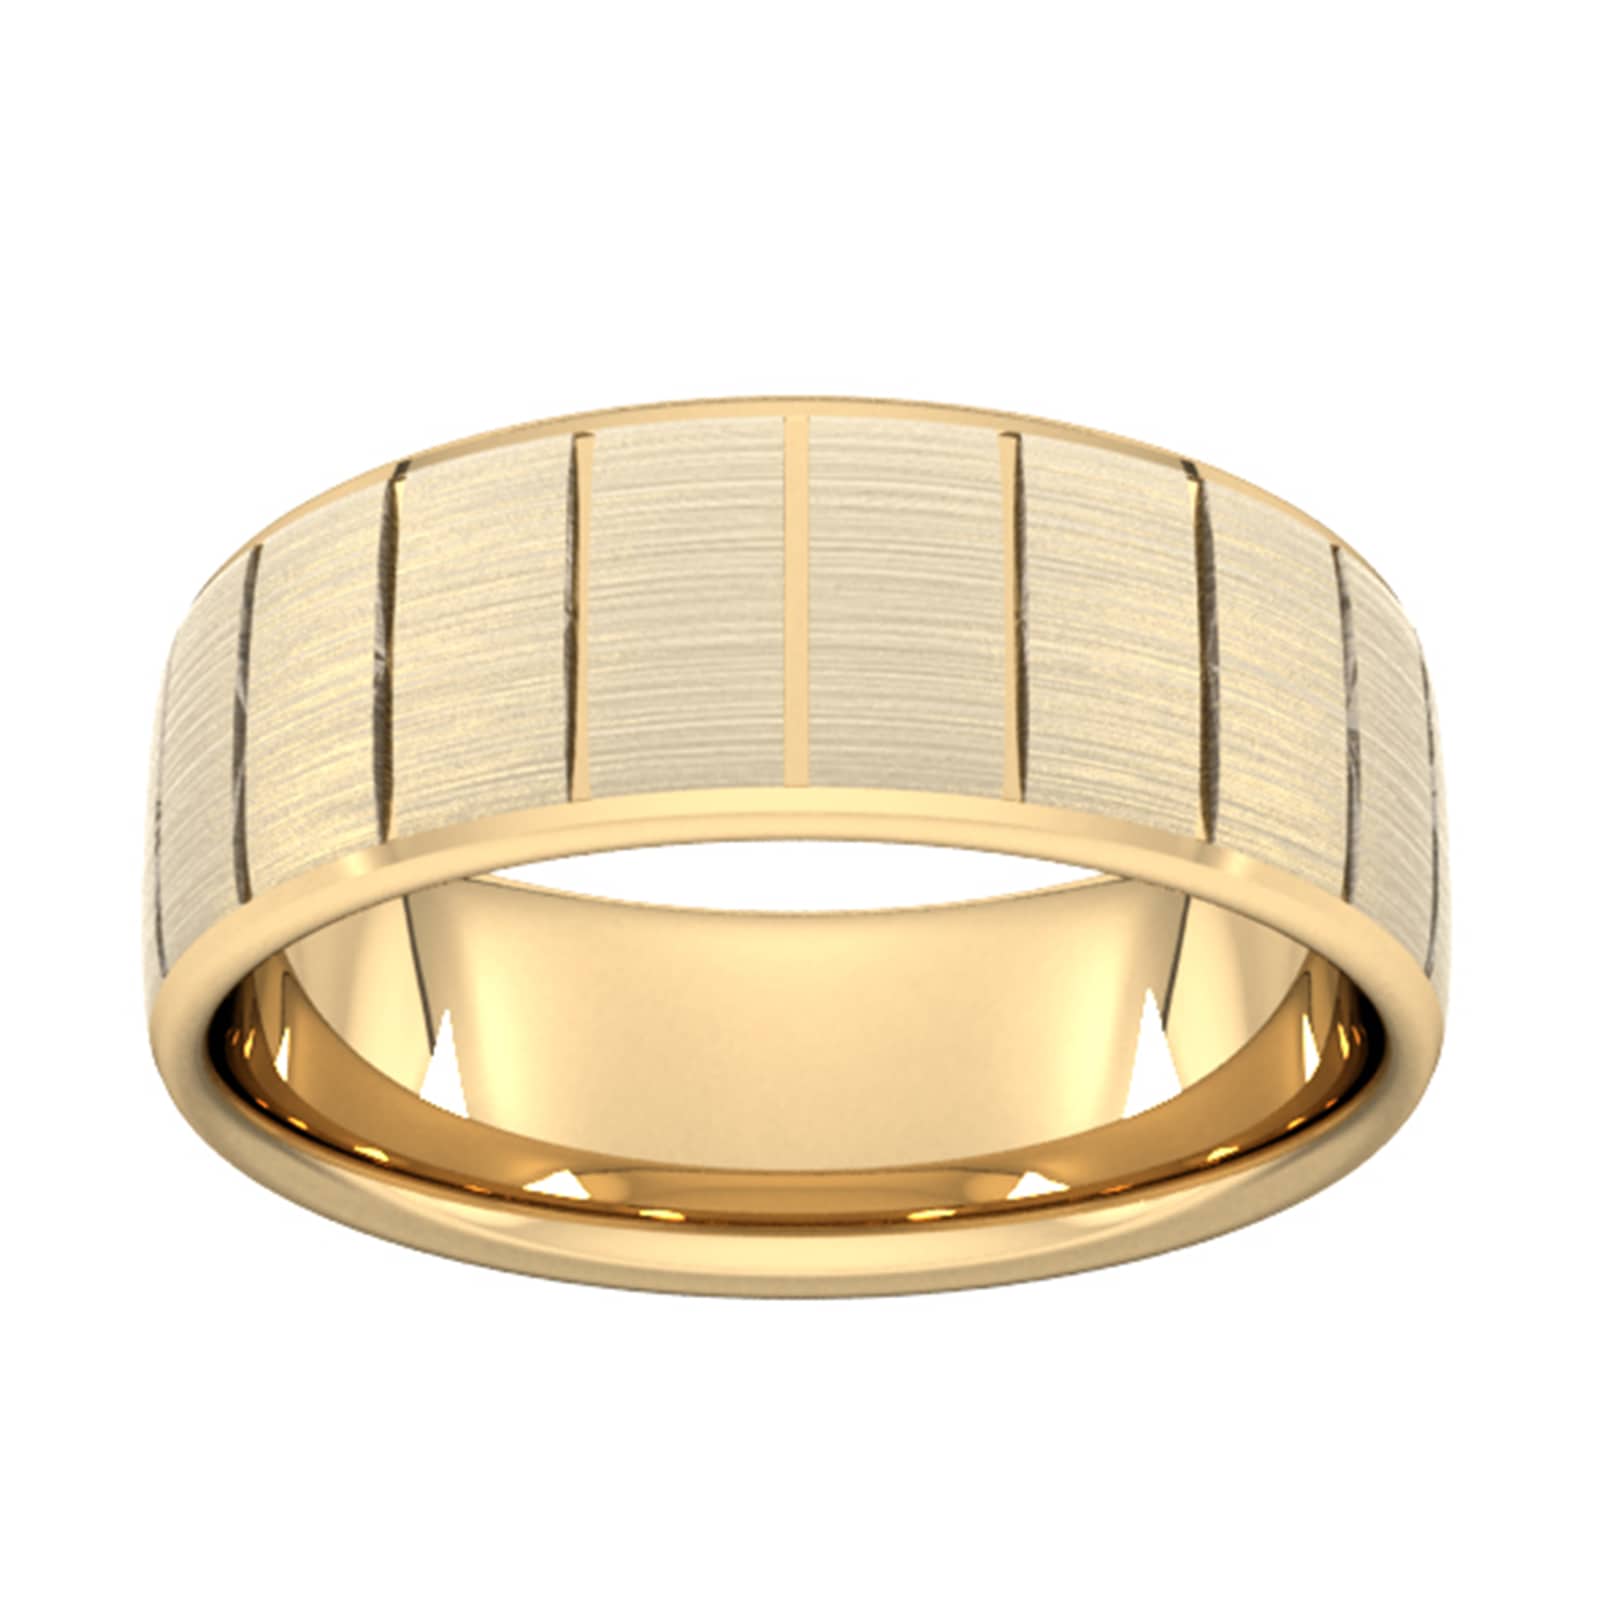 8mm Traditional Court Heavy Vertical Lines Wedding Ring In 18 Carat Yellow Gold - Ring Size W